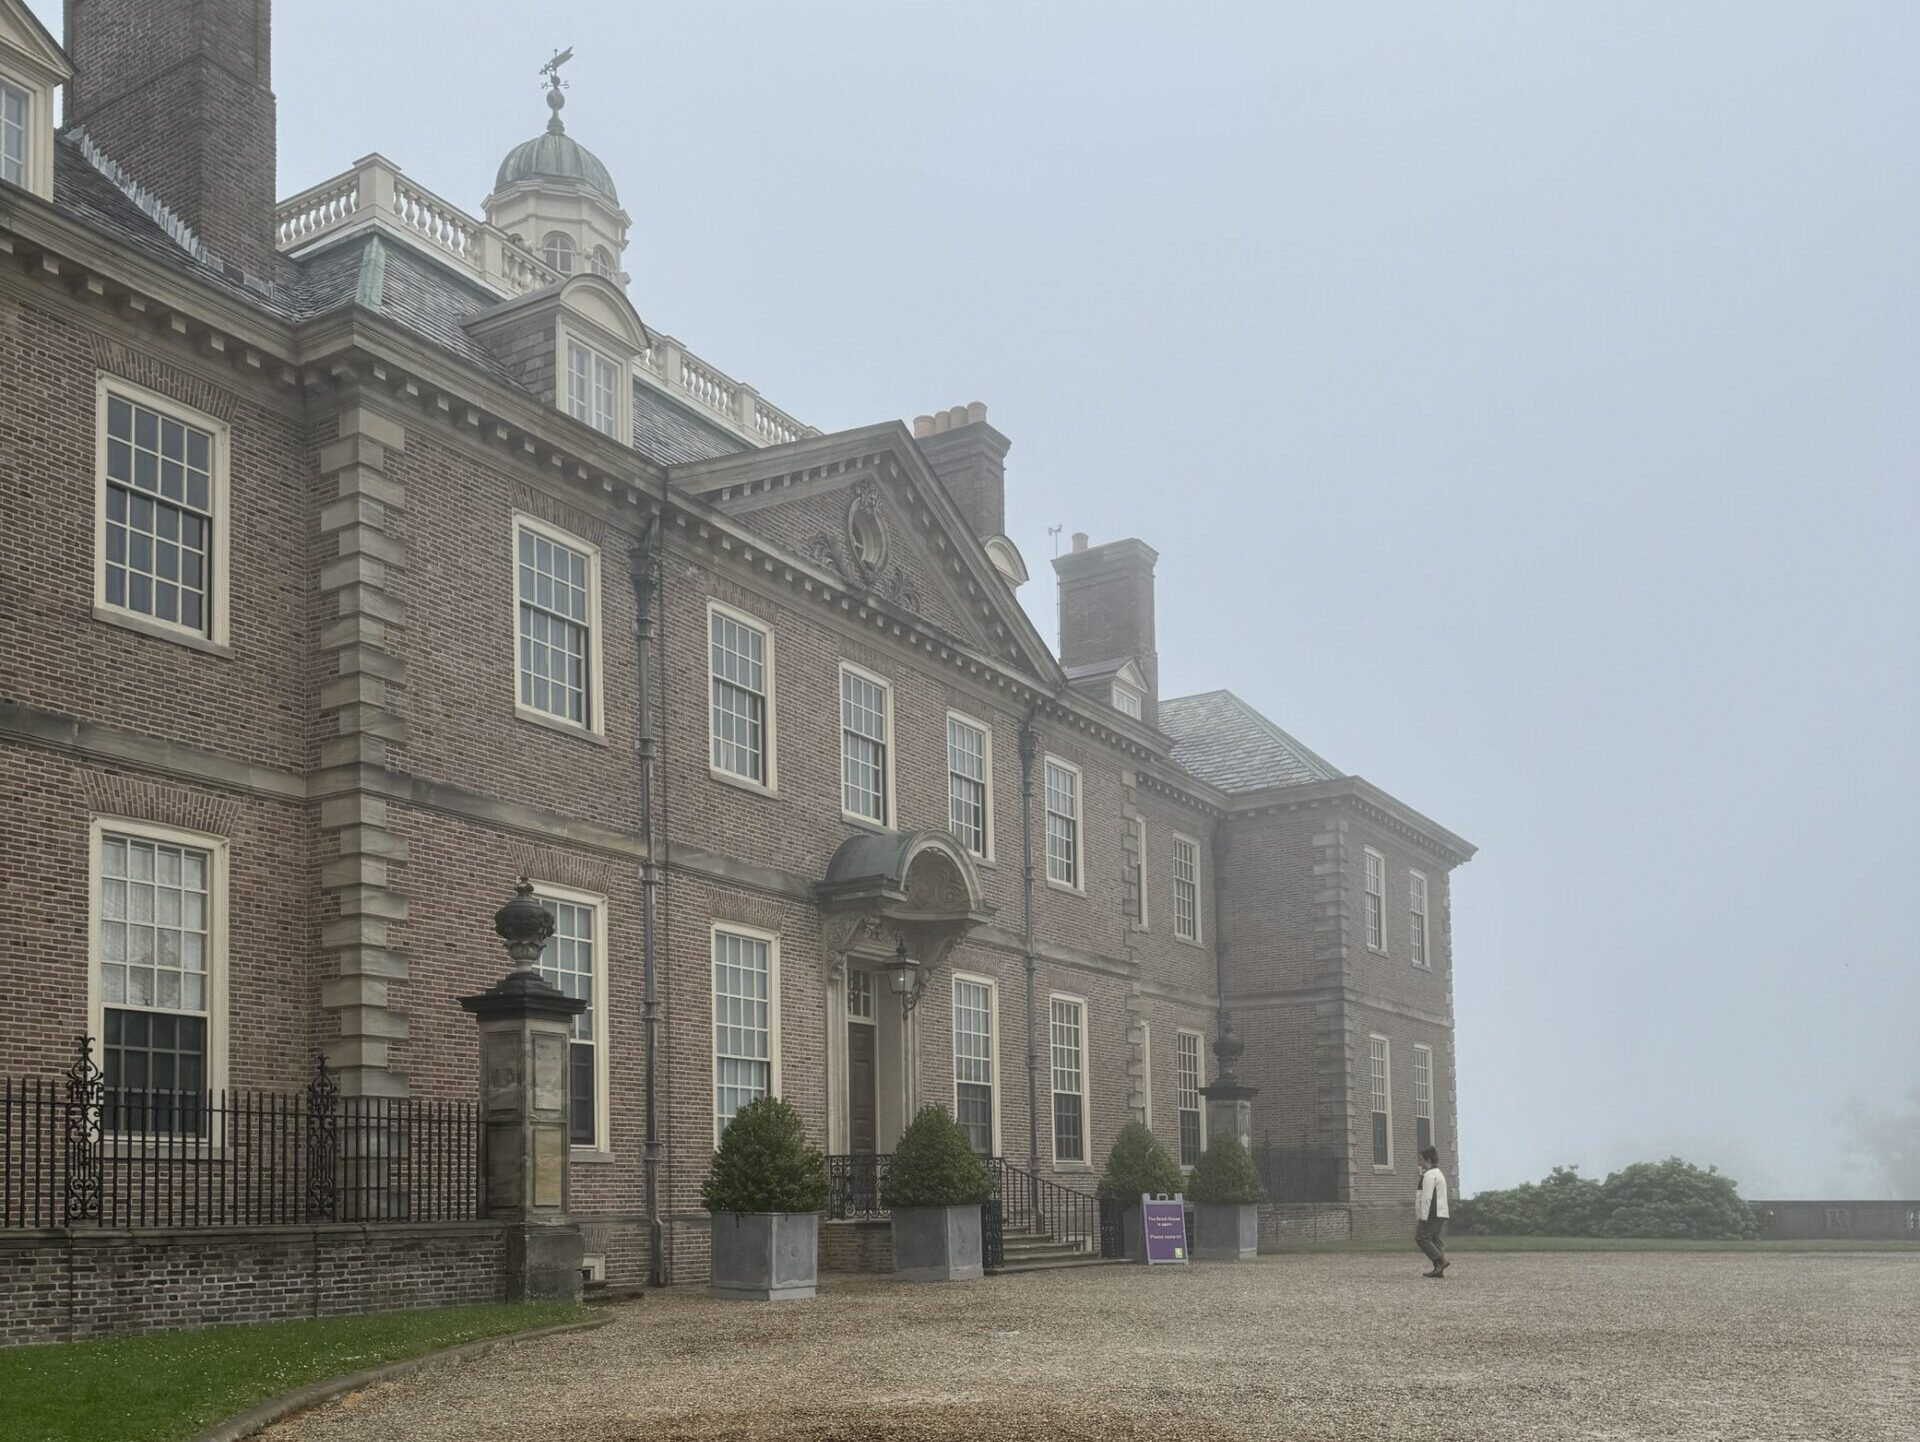 An estate made of stone sits on a pebbled drive in the fog.